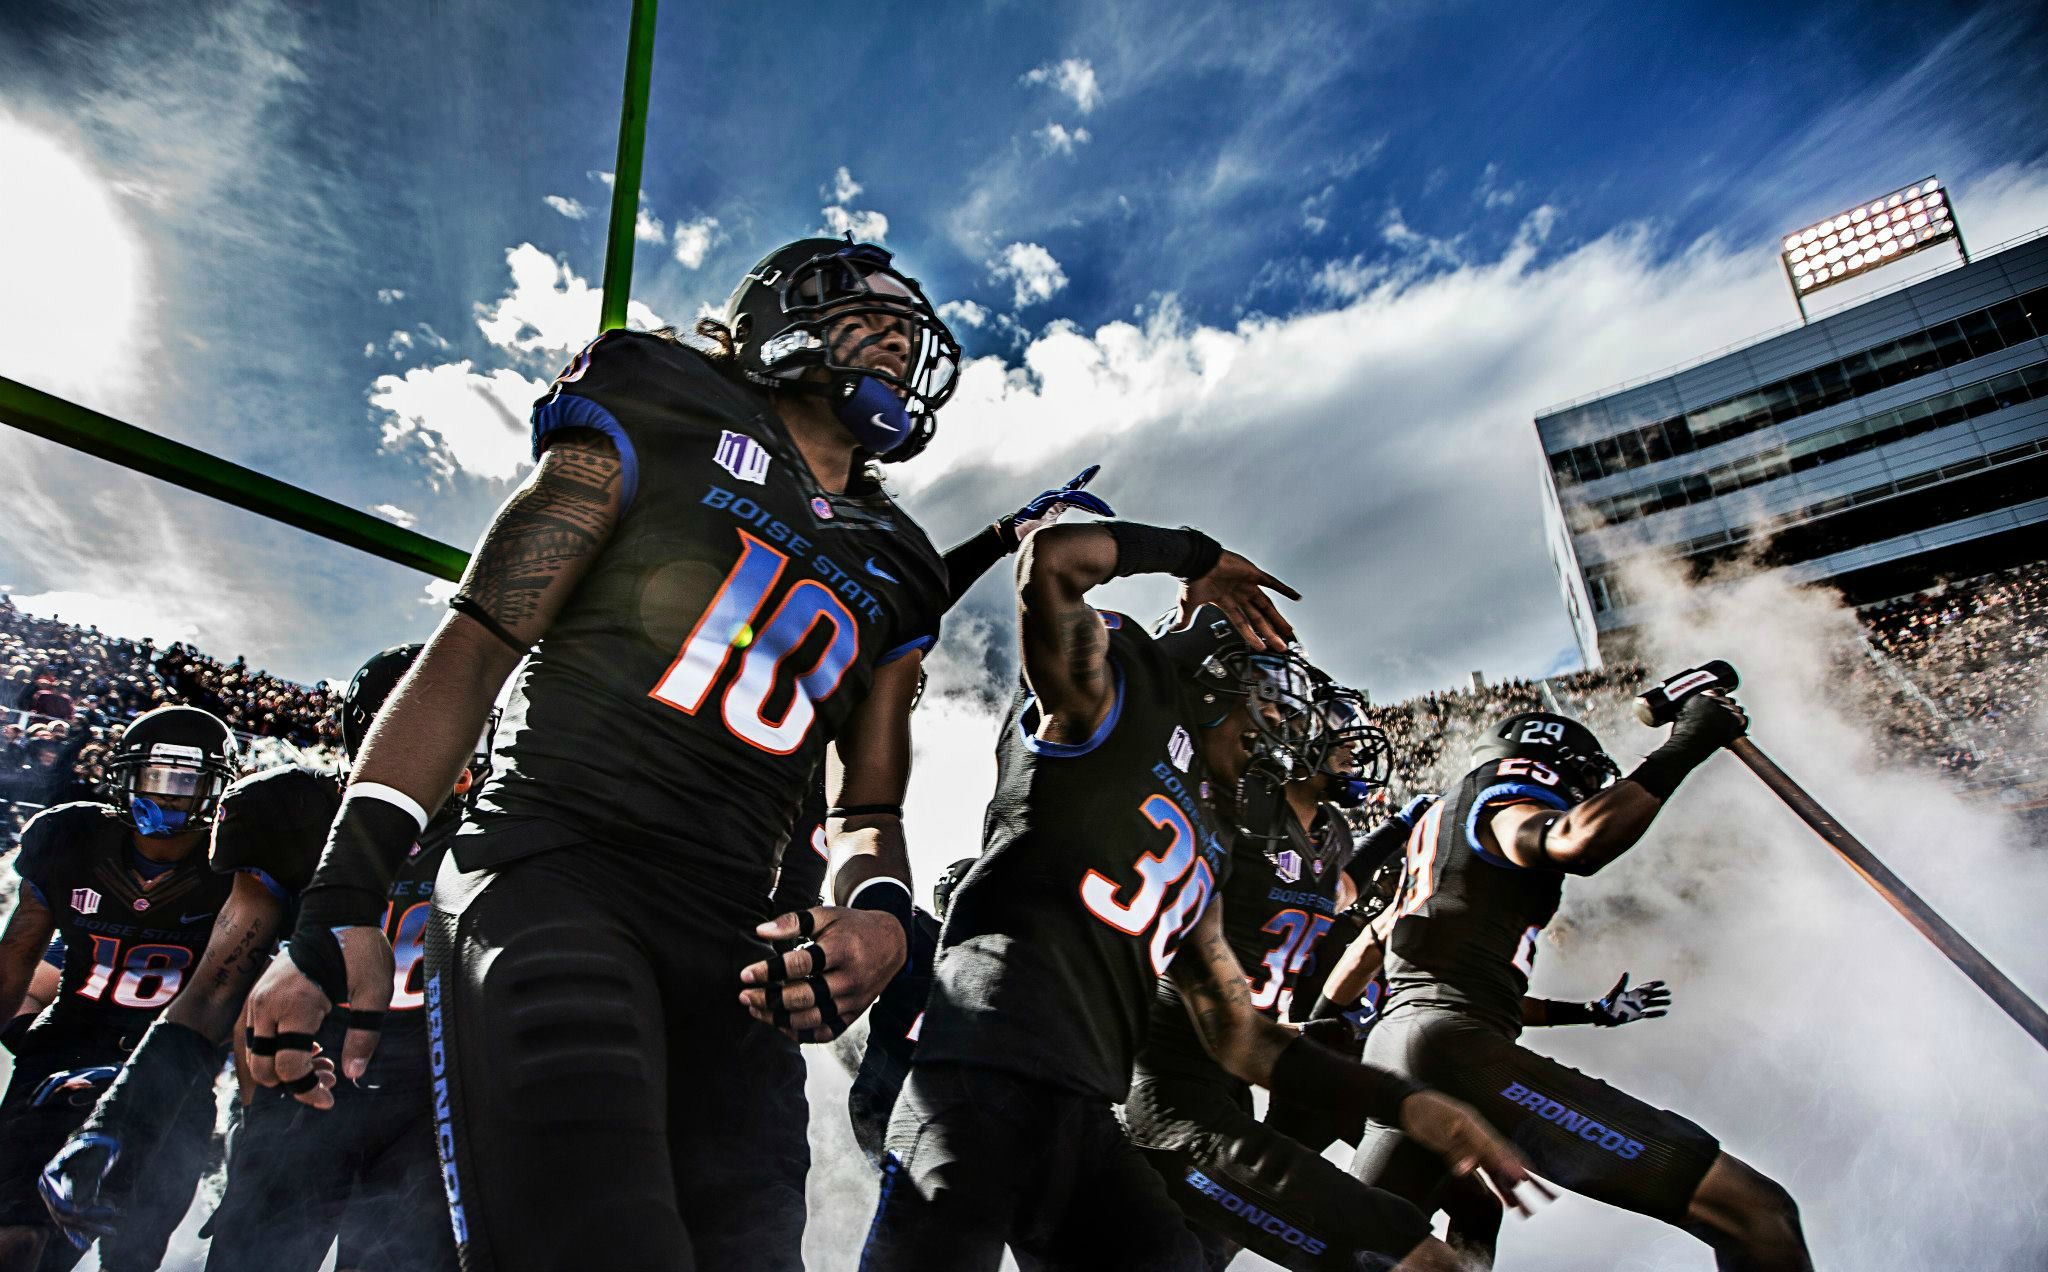 A friend of mine took this photo of the Boise State players